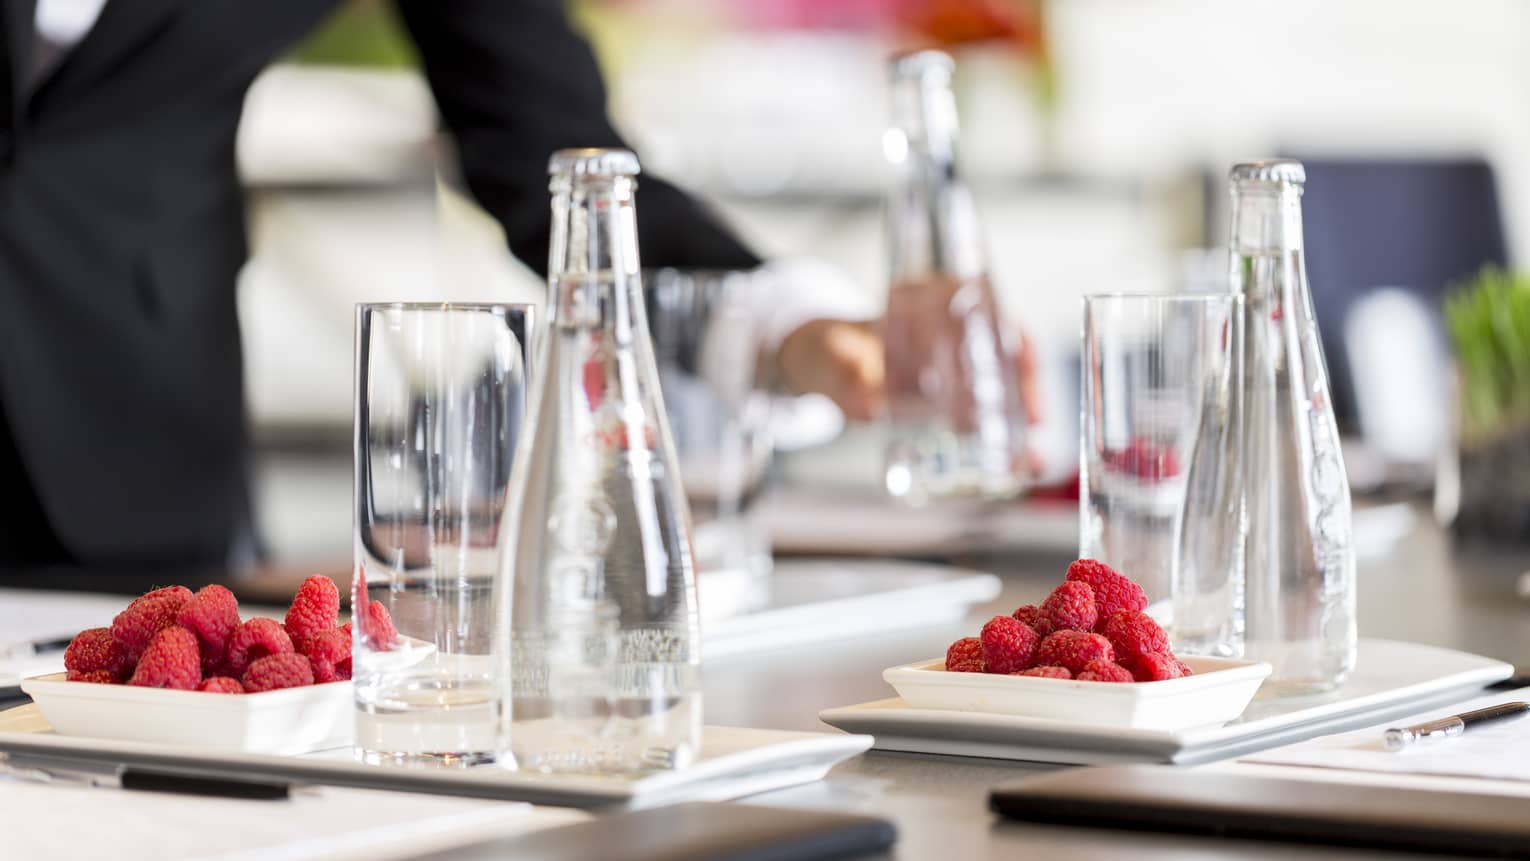 Glass bottles of water and plates of raspberries are set in preparation for a meeting